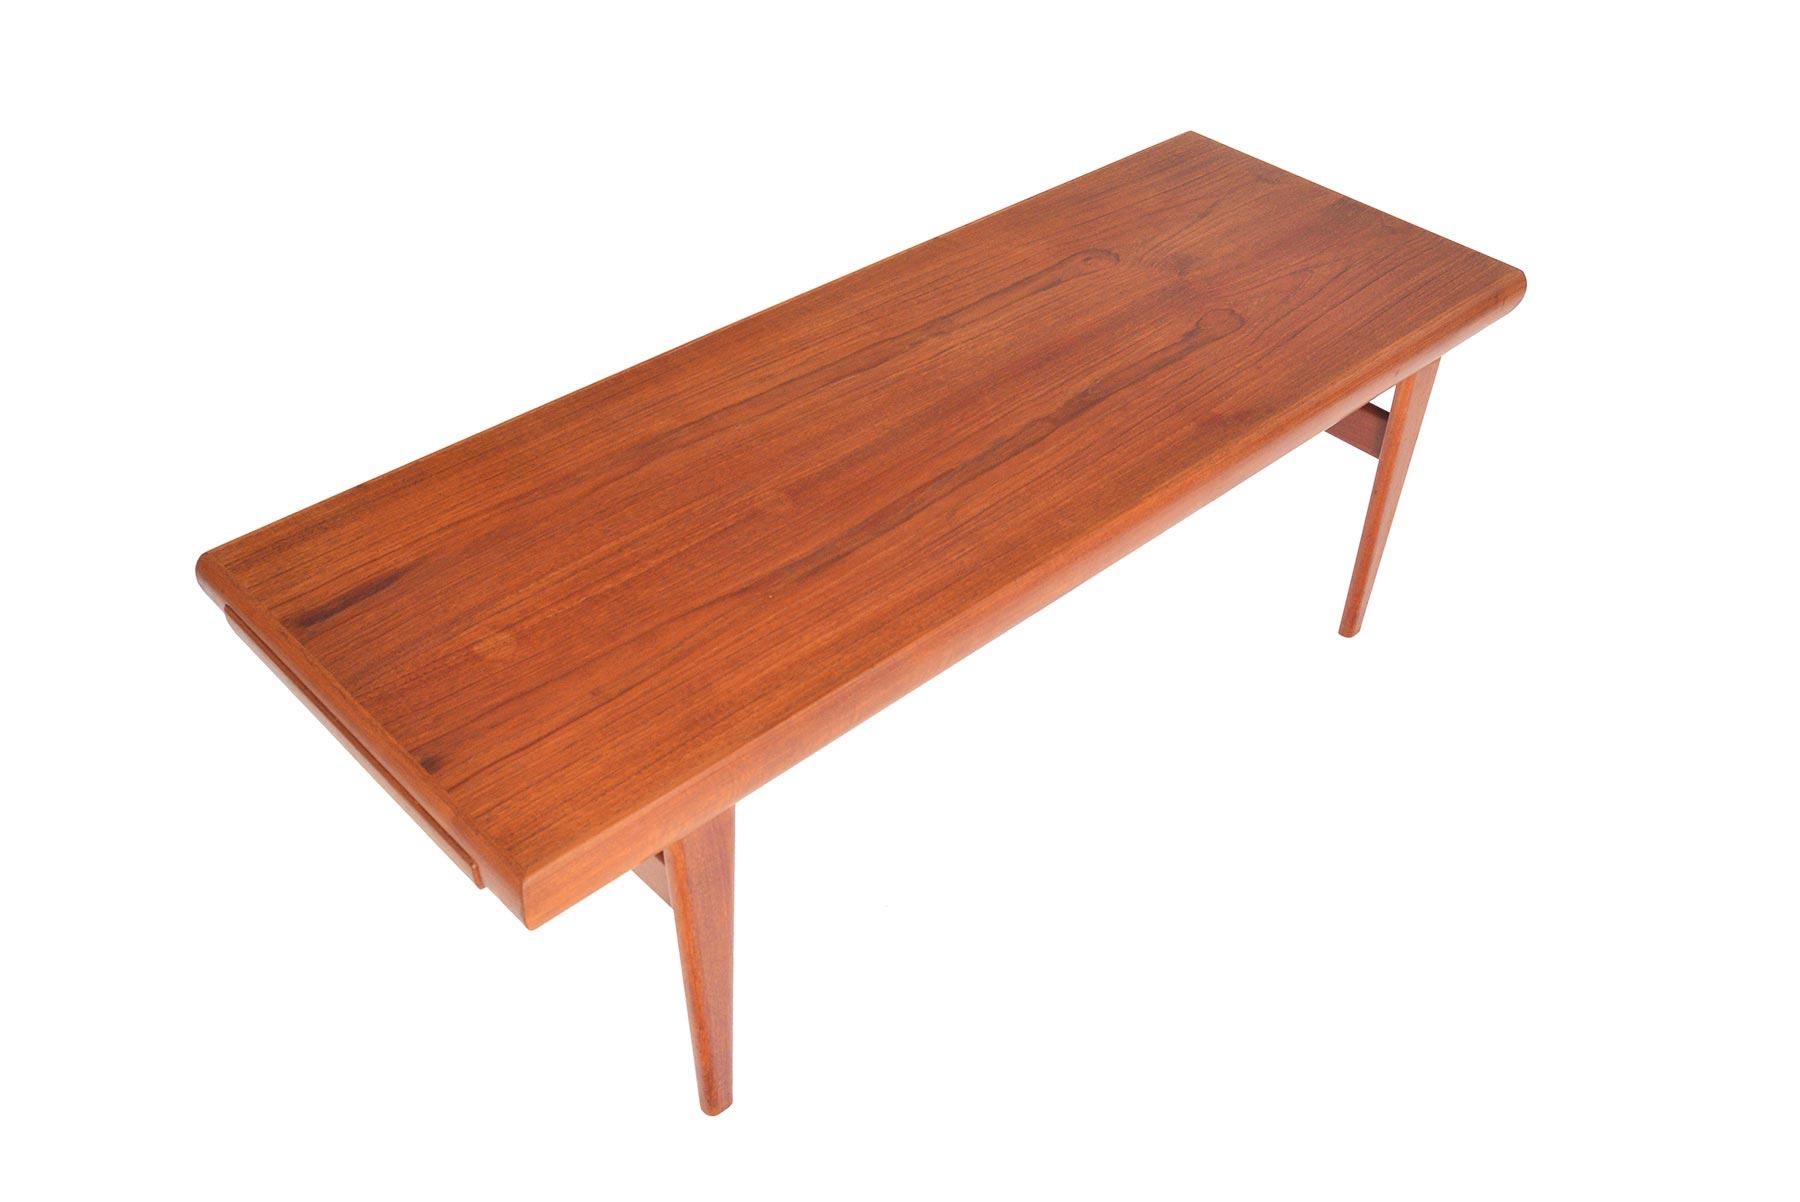 This Danish modern teak coffee table appears simple but is designed with ingenious functionality. The large teak top offers a round form and holds a teak tray on one side. The opposing end features a collapsible side table crafted with the same